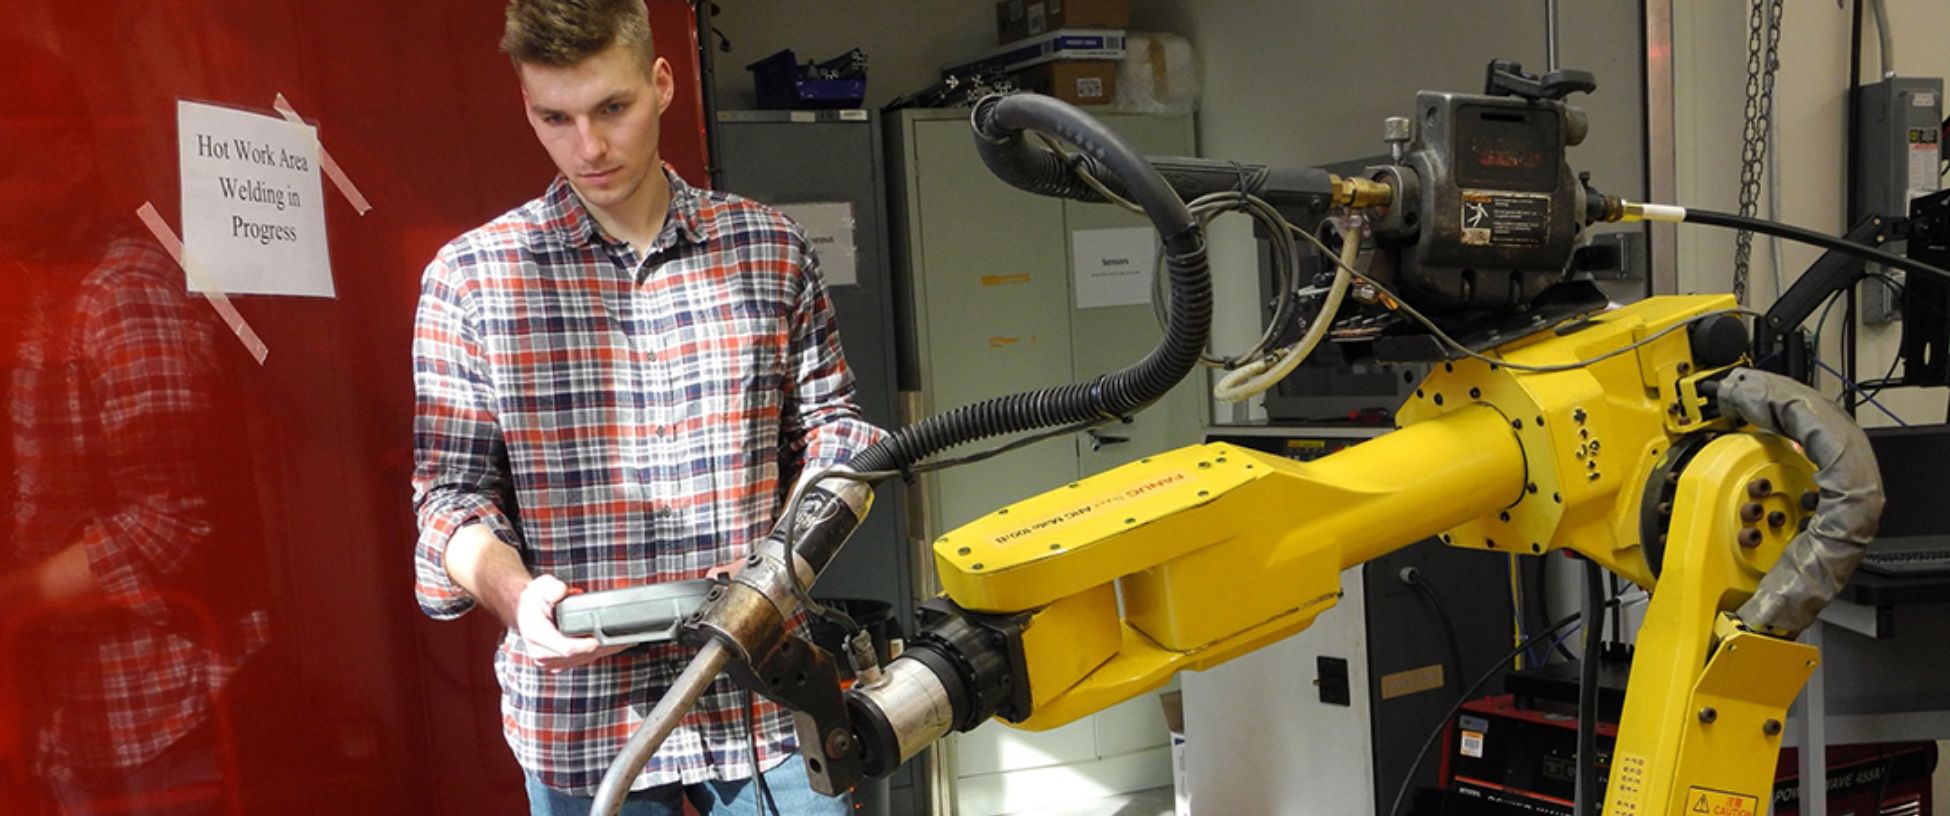 Student works with a radio-controlled, yellow, mechanical arm.